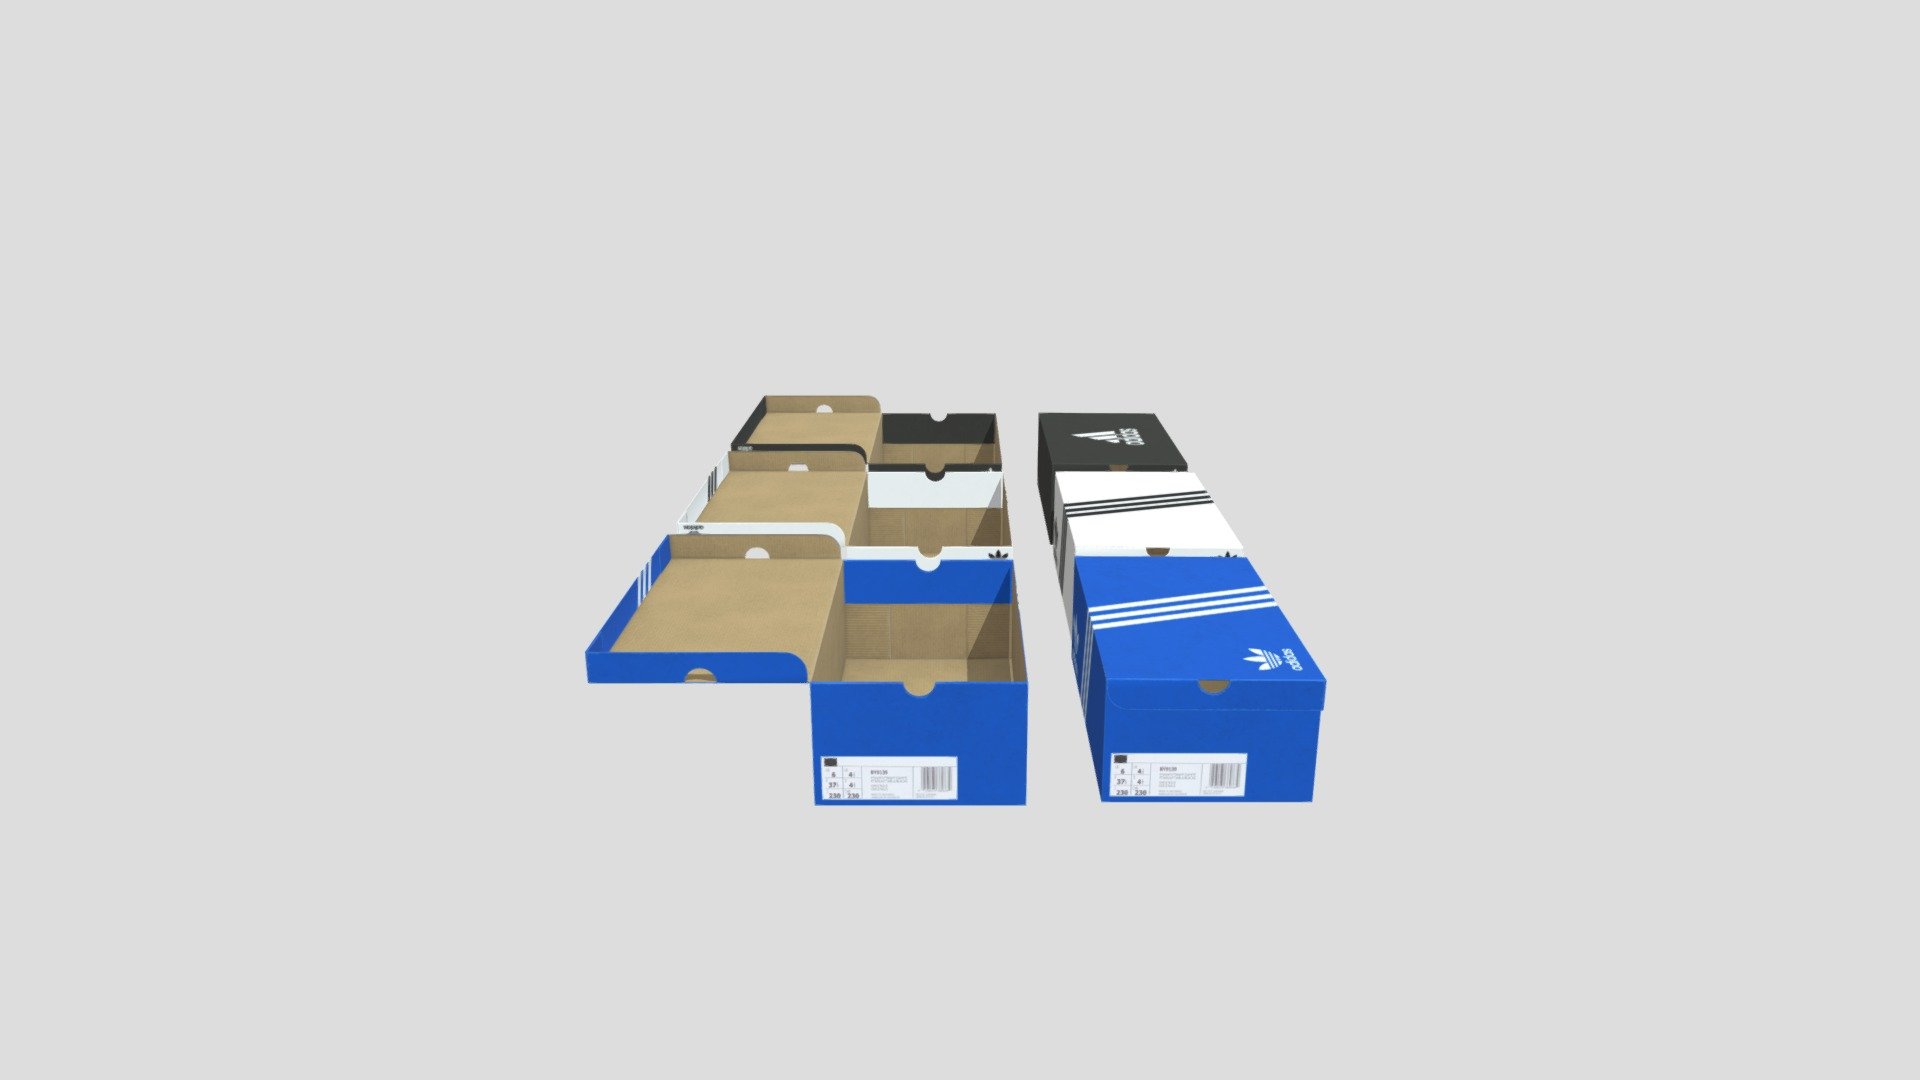 This Adidas Shoe Boxe set Contains:

6 Meshes (3 open, 3 Closed)

4, 4K Textures -Adidas Blue 4K Textures -Adidas White 4K Textures -Adidas Black 4K Textures -Cardboard Interior 4K Textures

Each mesh is 808 vertices and UV Unwrapped for future texturing 3d model